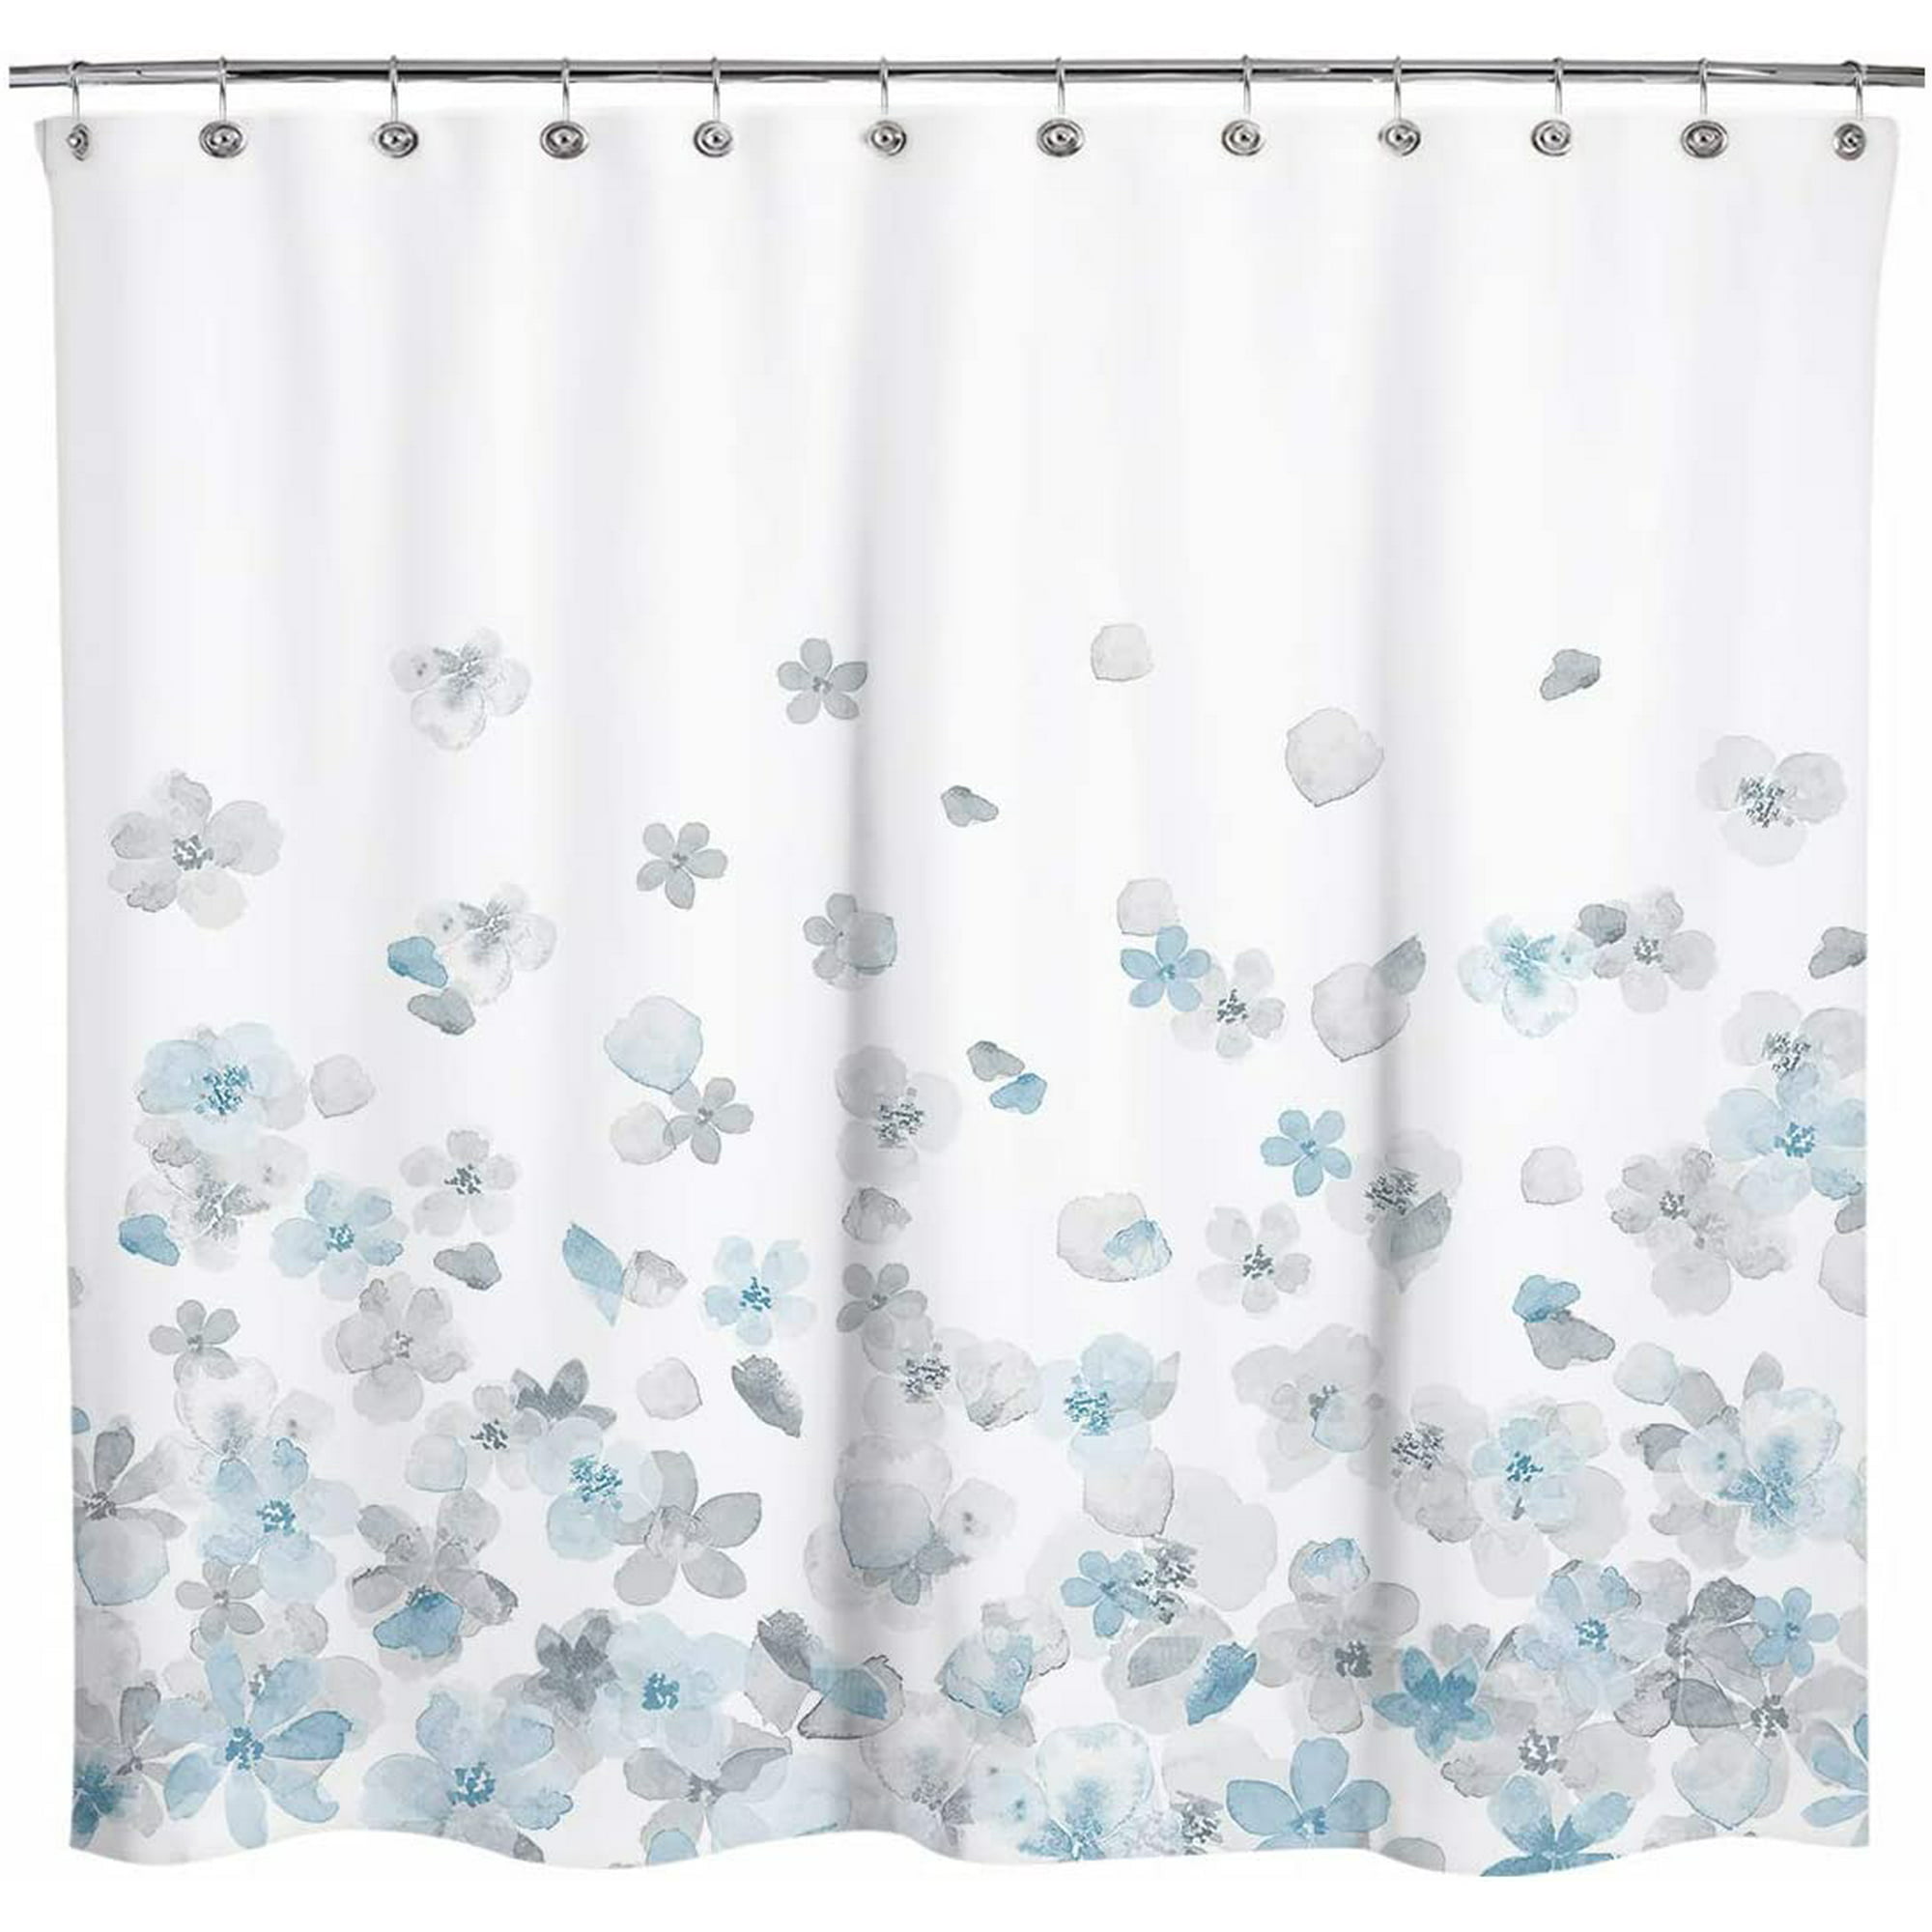 Bathroom Decor With White Background, Are Shower Curtains Out Of Style